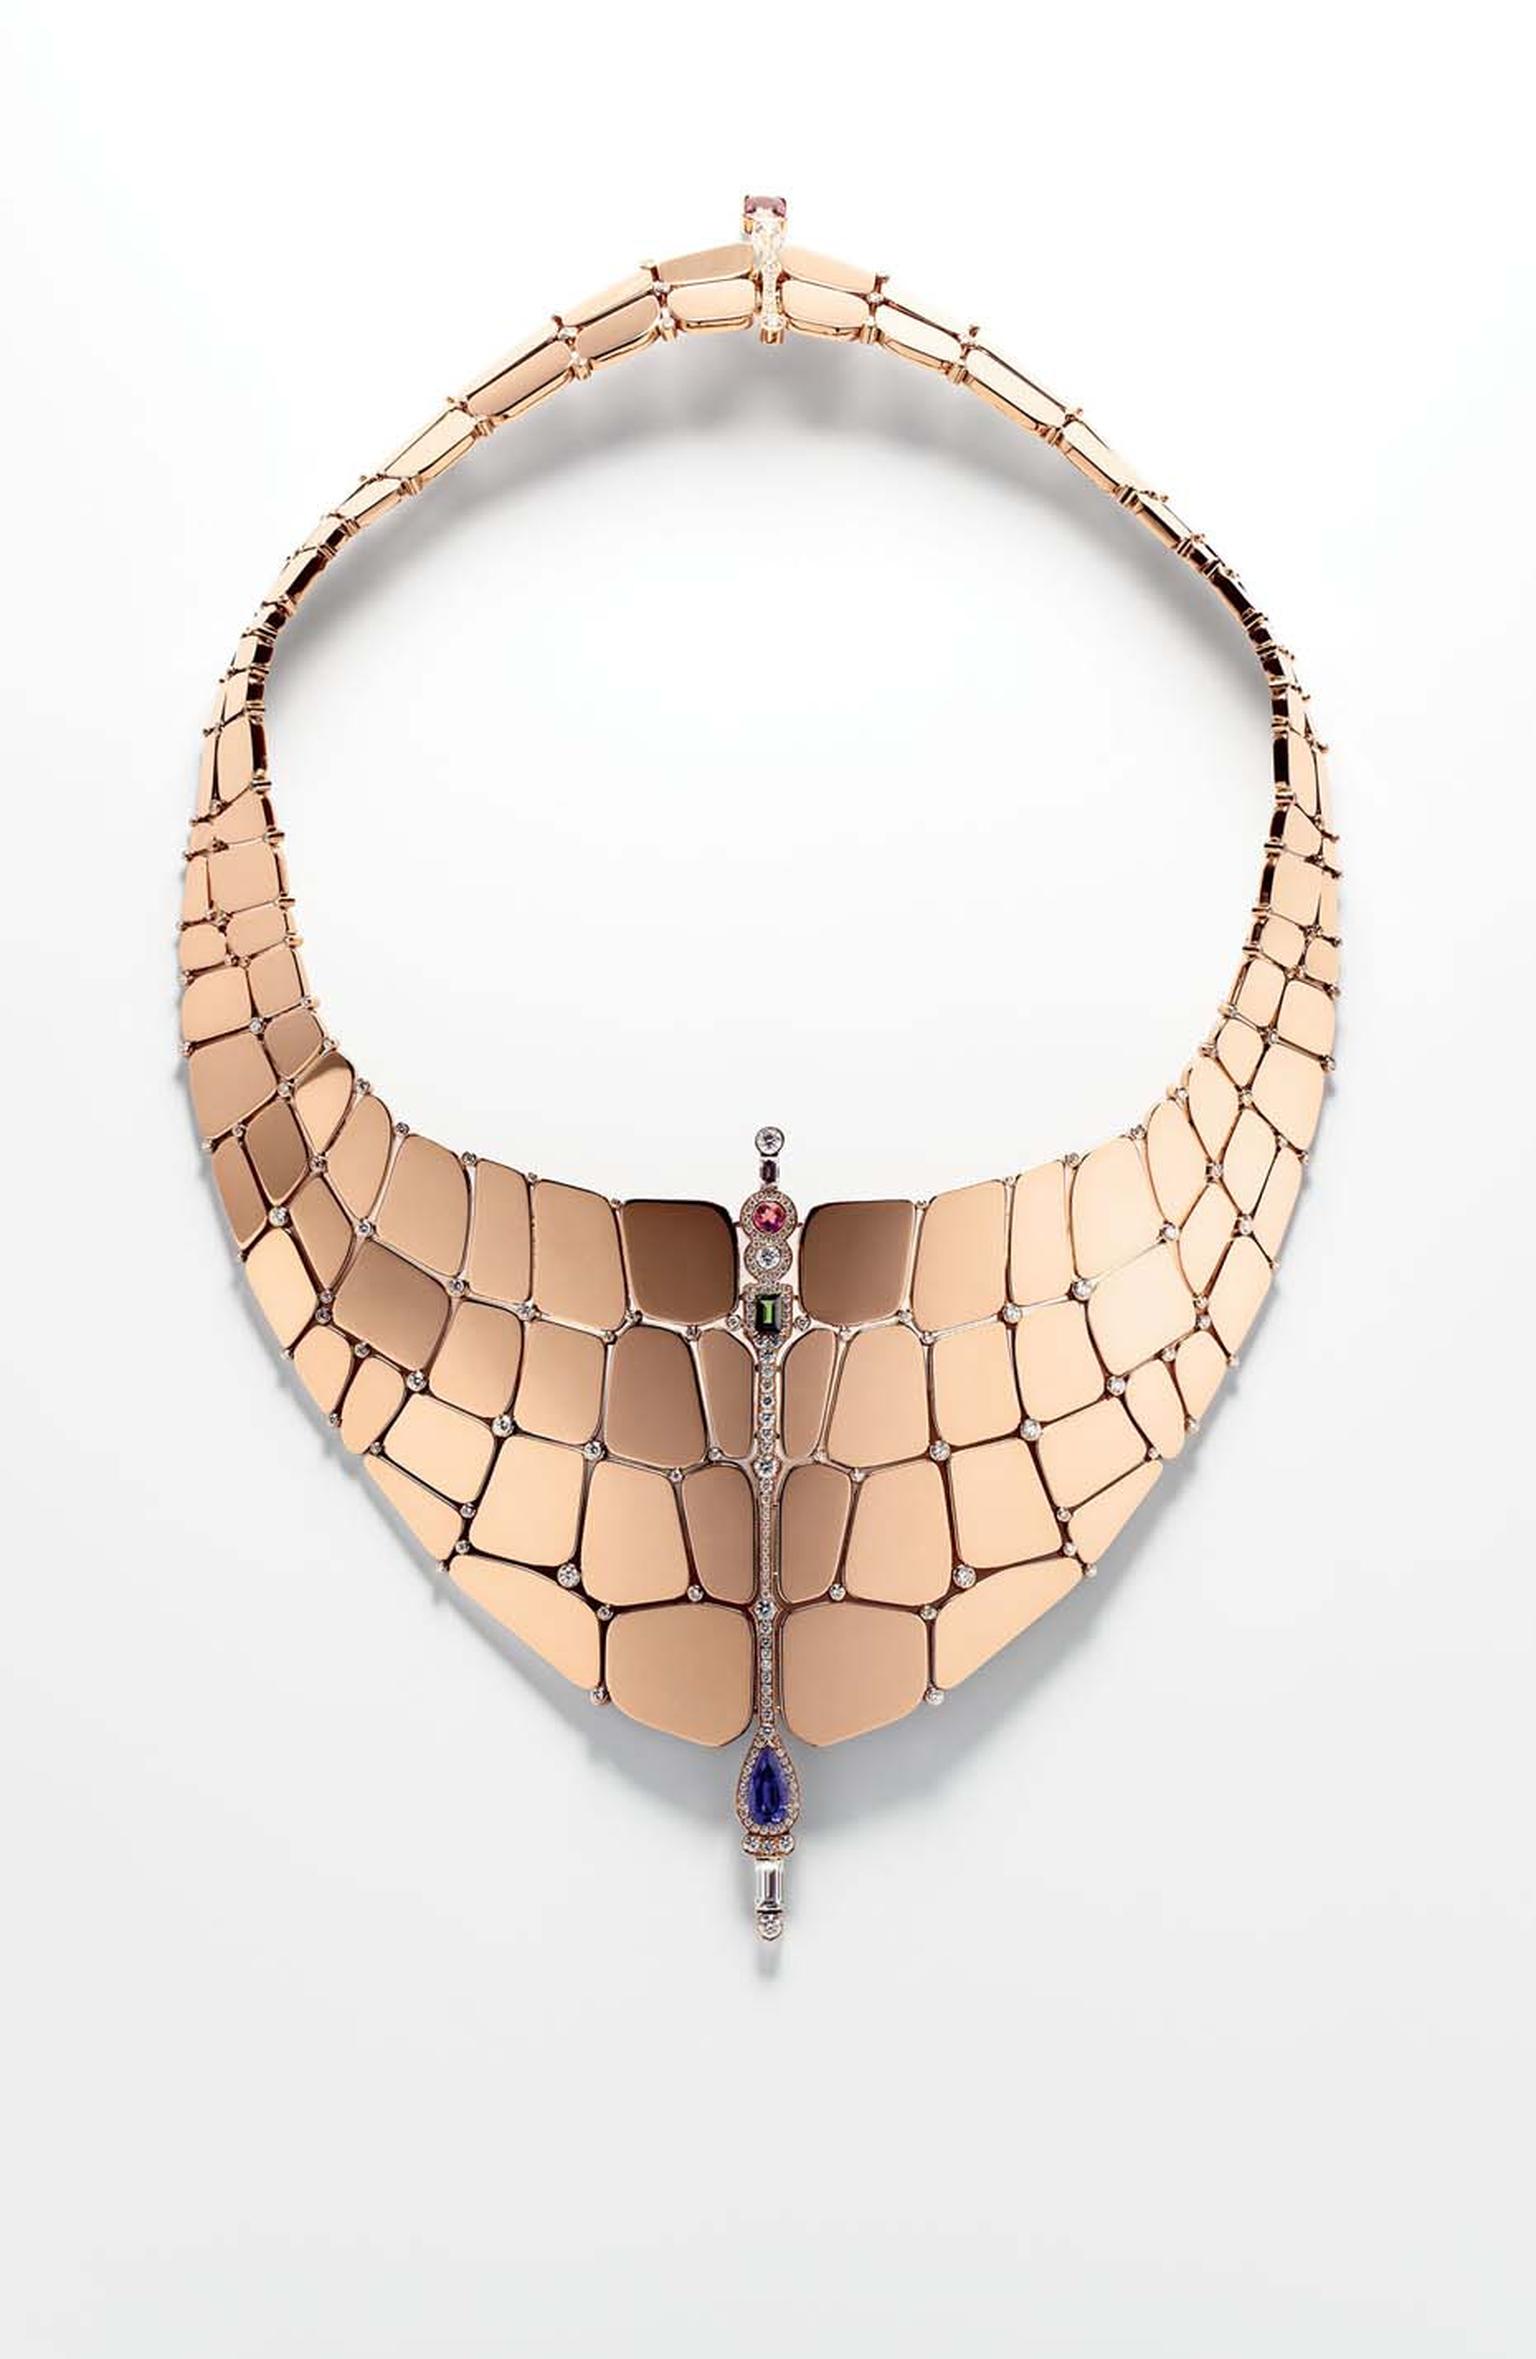 Hermès Niloticus necklace in rose gold, diamonds and coloured stones.